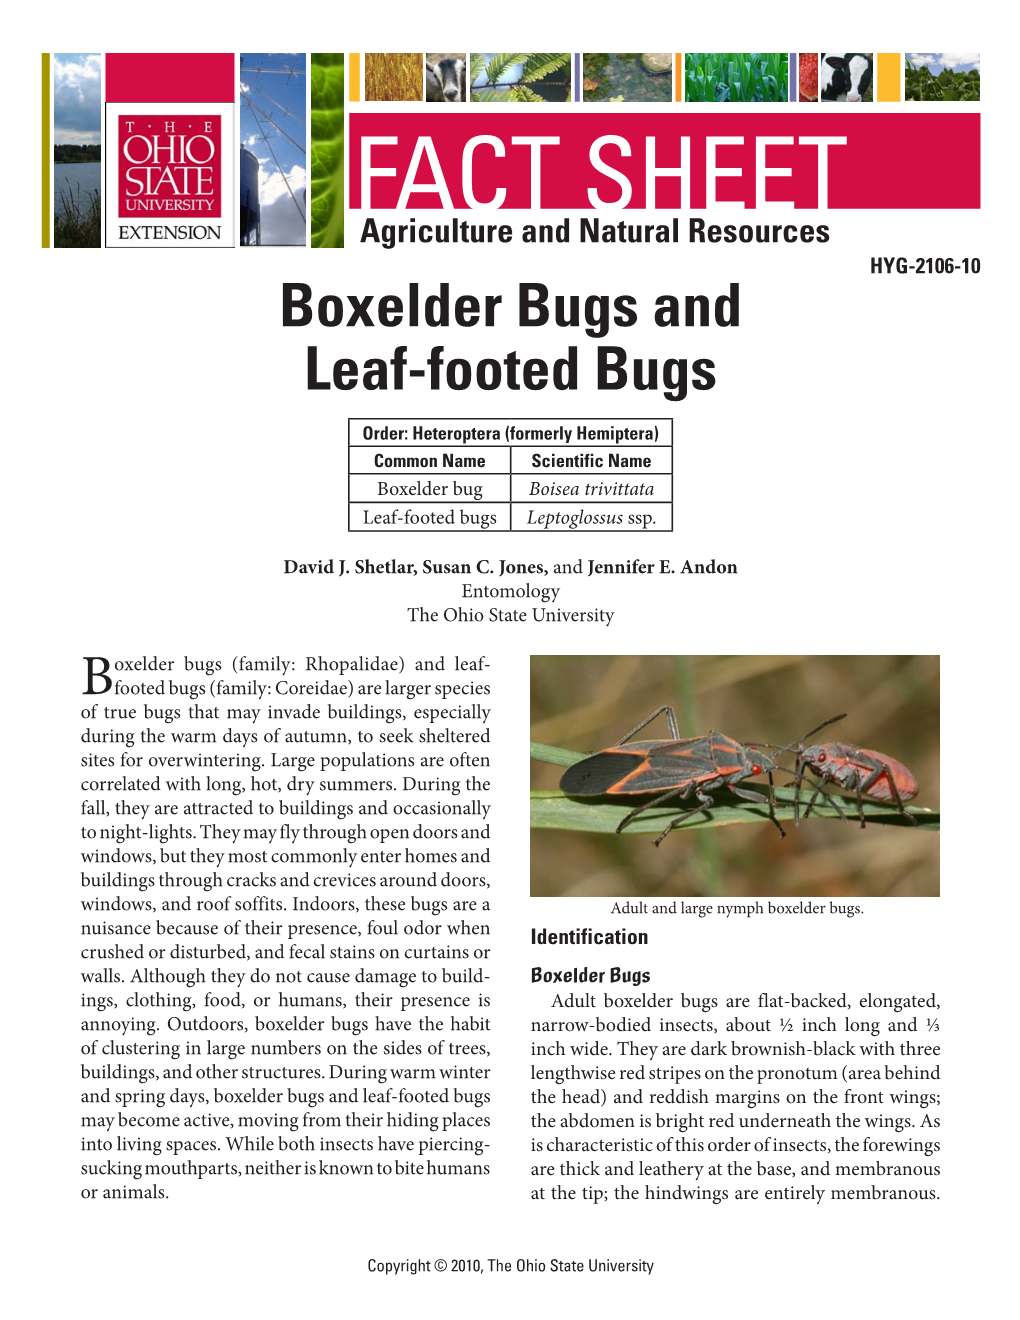 Boxelder Bugs and Leaf-Footed Bugs